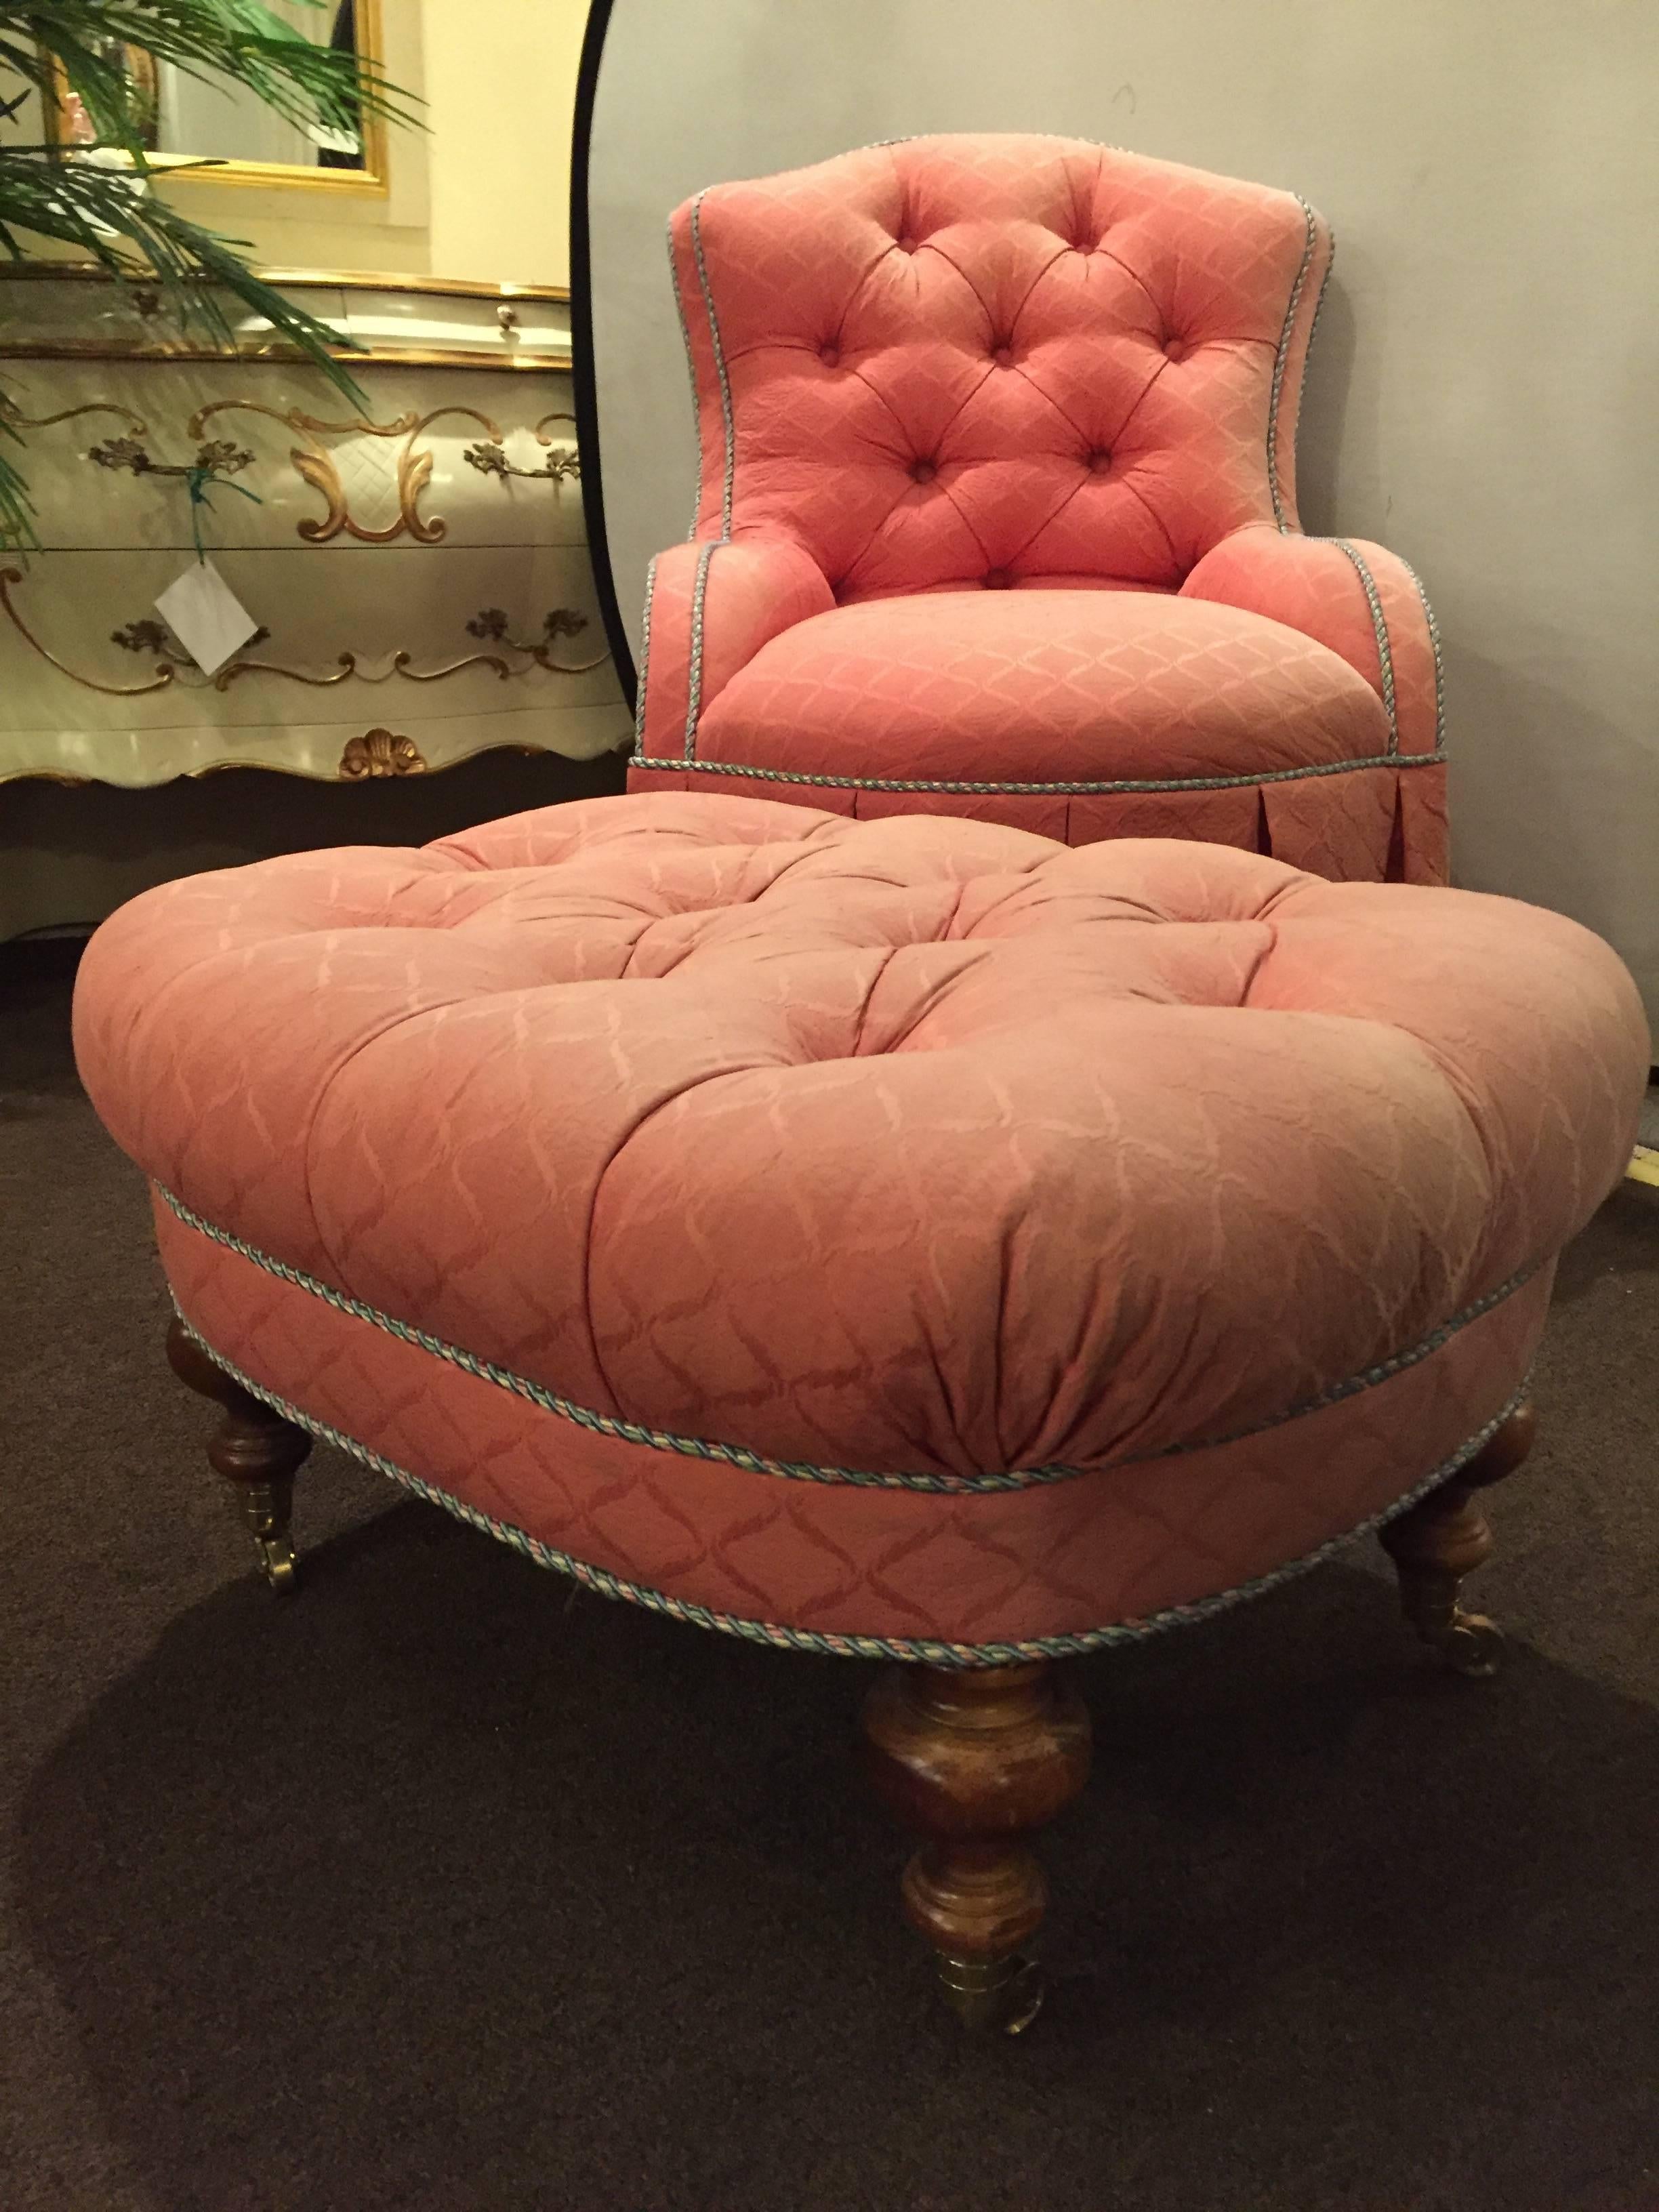 A finely upholstered custom quality slipper chair with matching ottoman. Having a tufted backrest and footrest this decorative chair and ottoman set are sure to add style and flair to any room in the house. The whole sitting on brass casters with